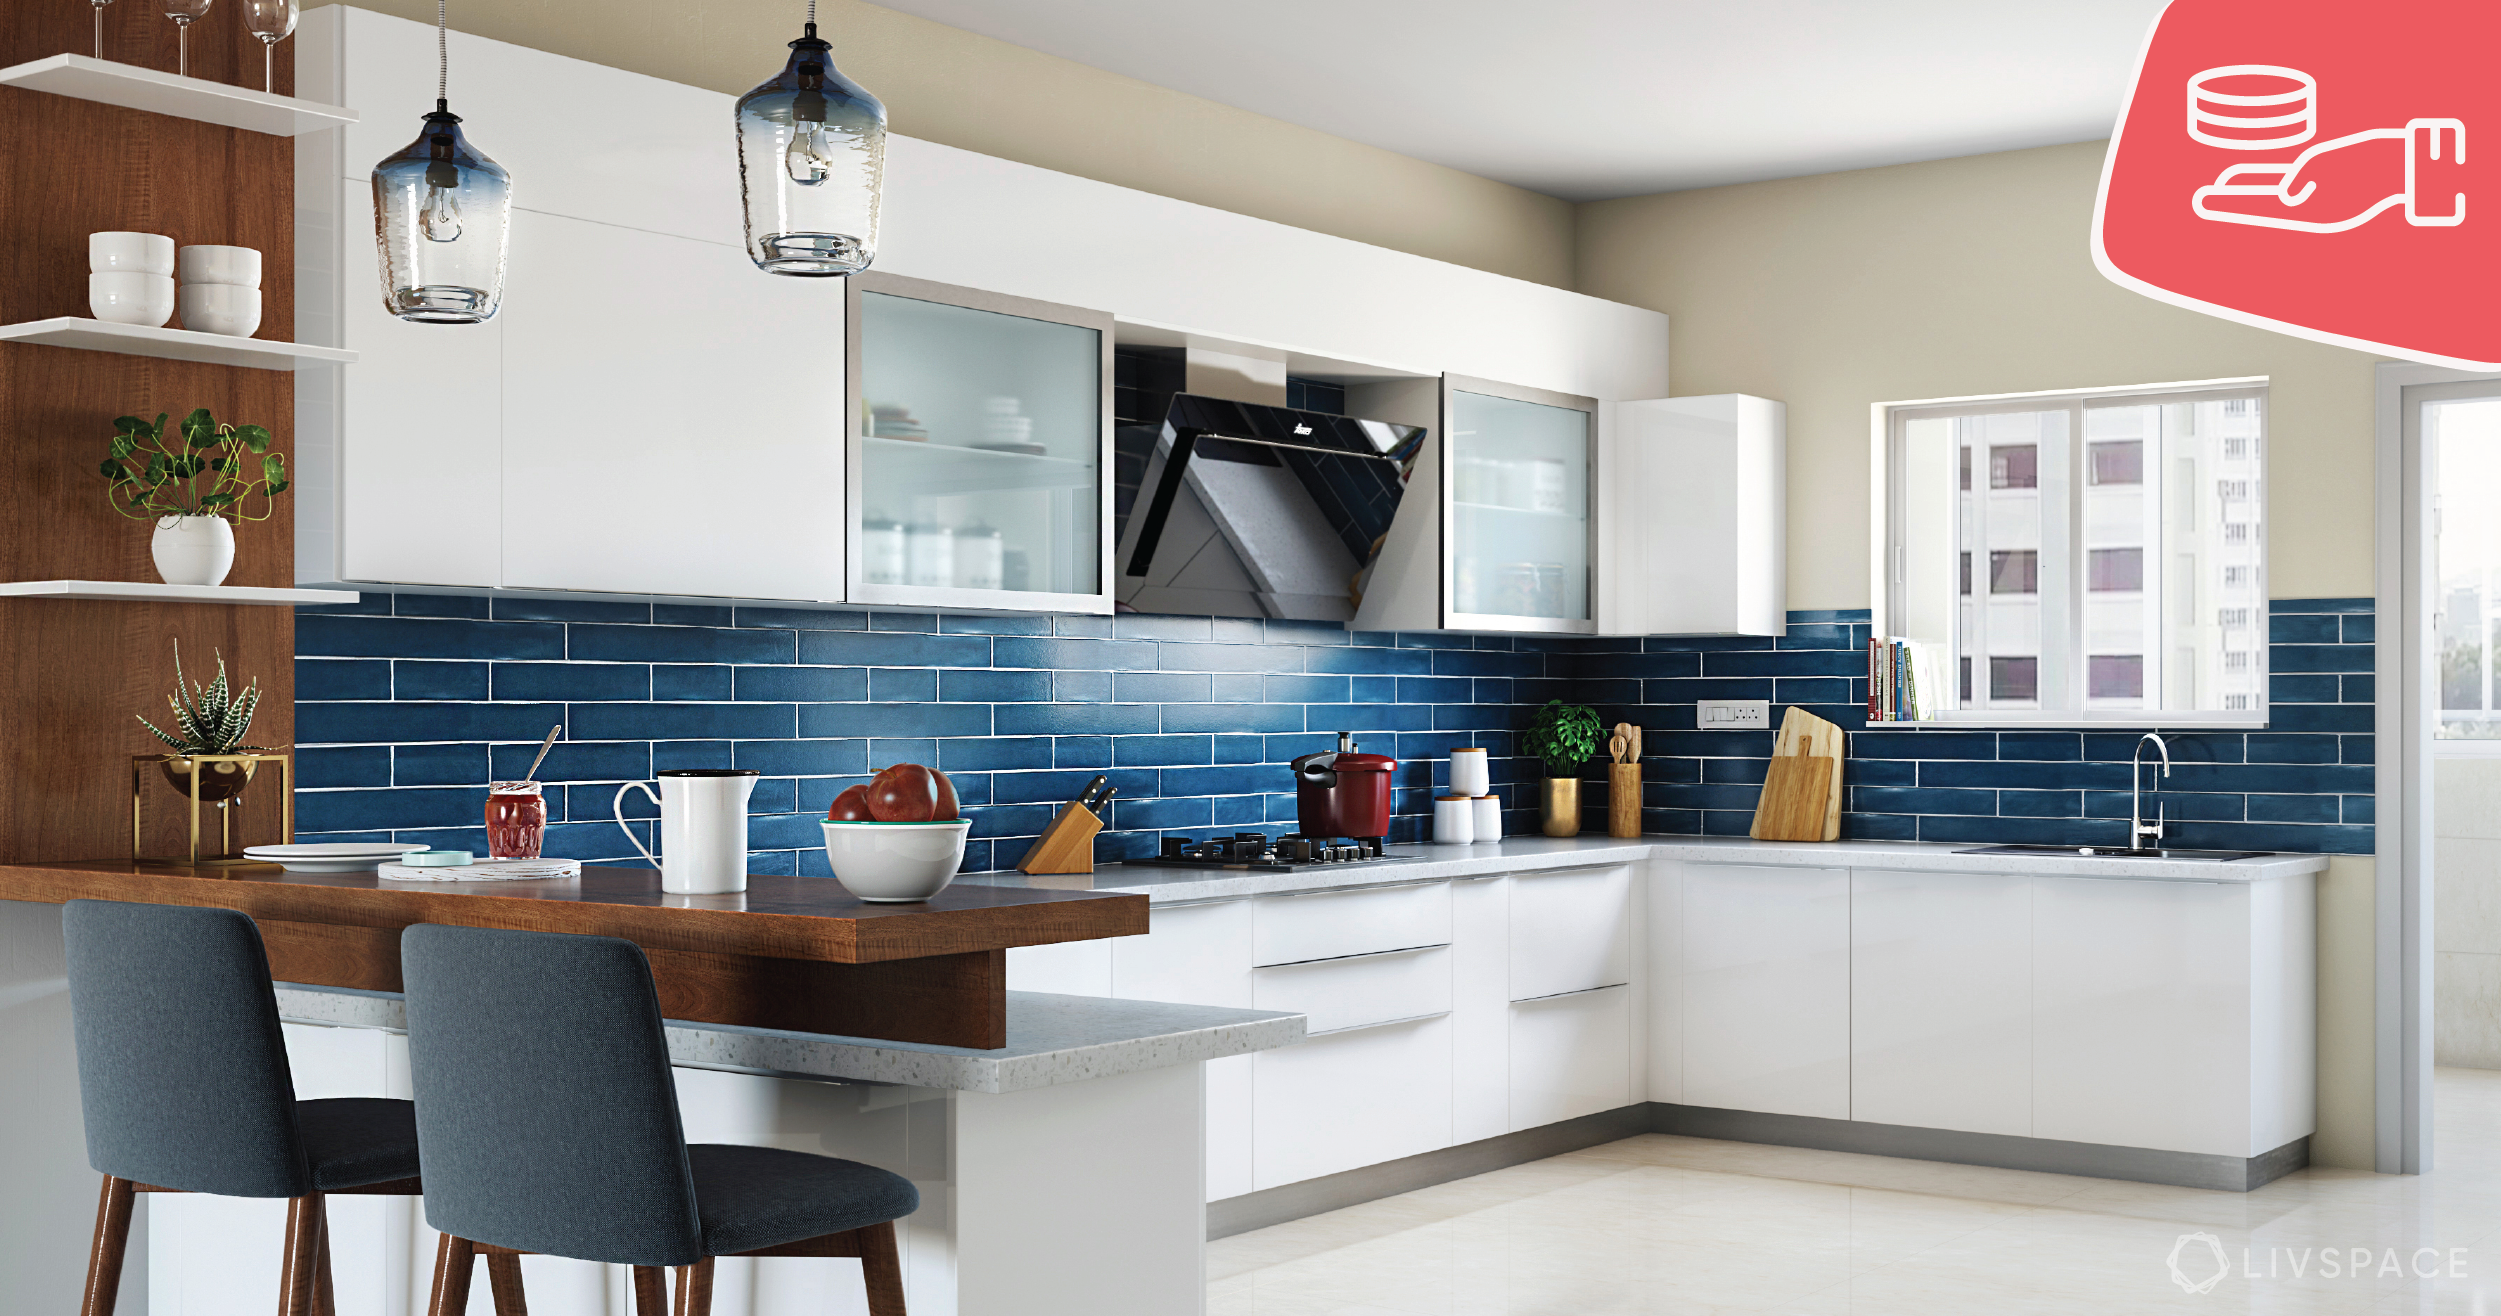 Give Your Kitchen a Facelift on a Budget